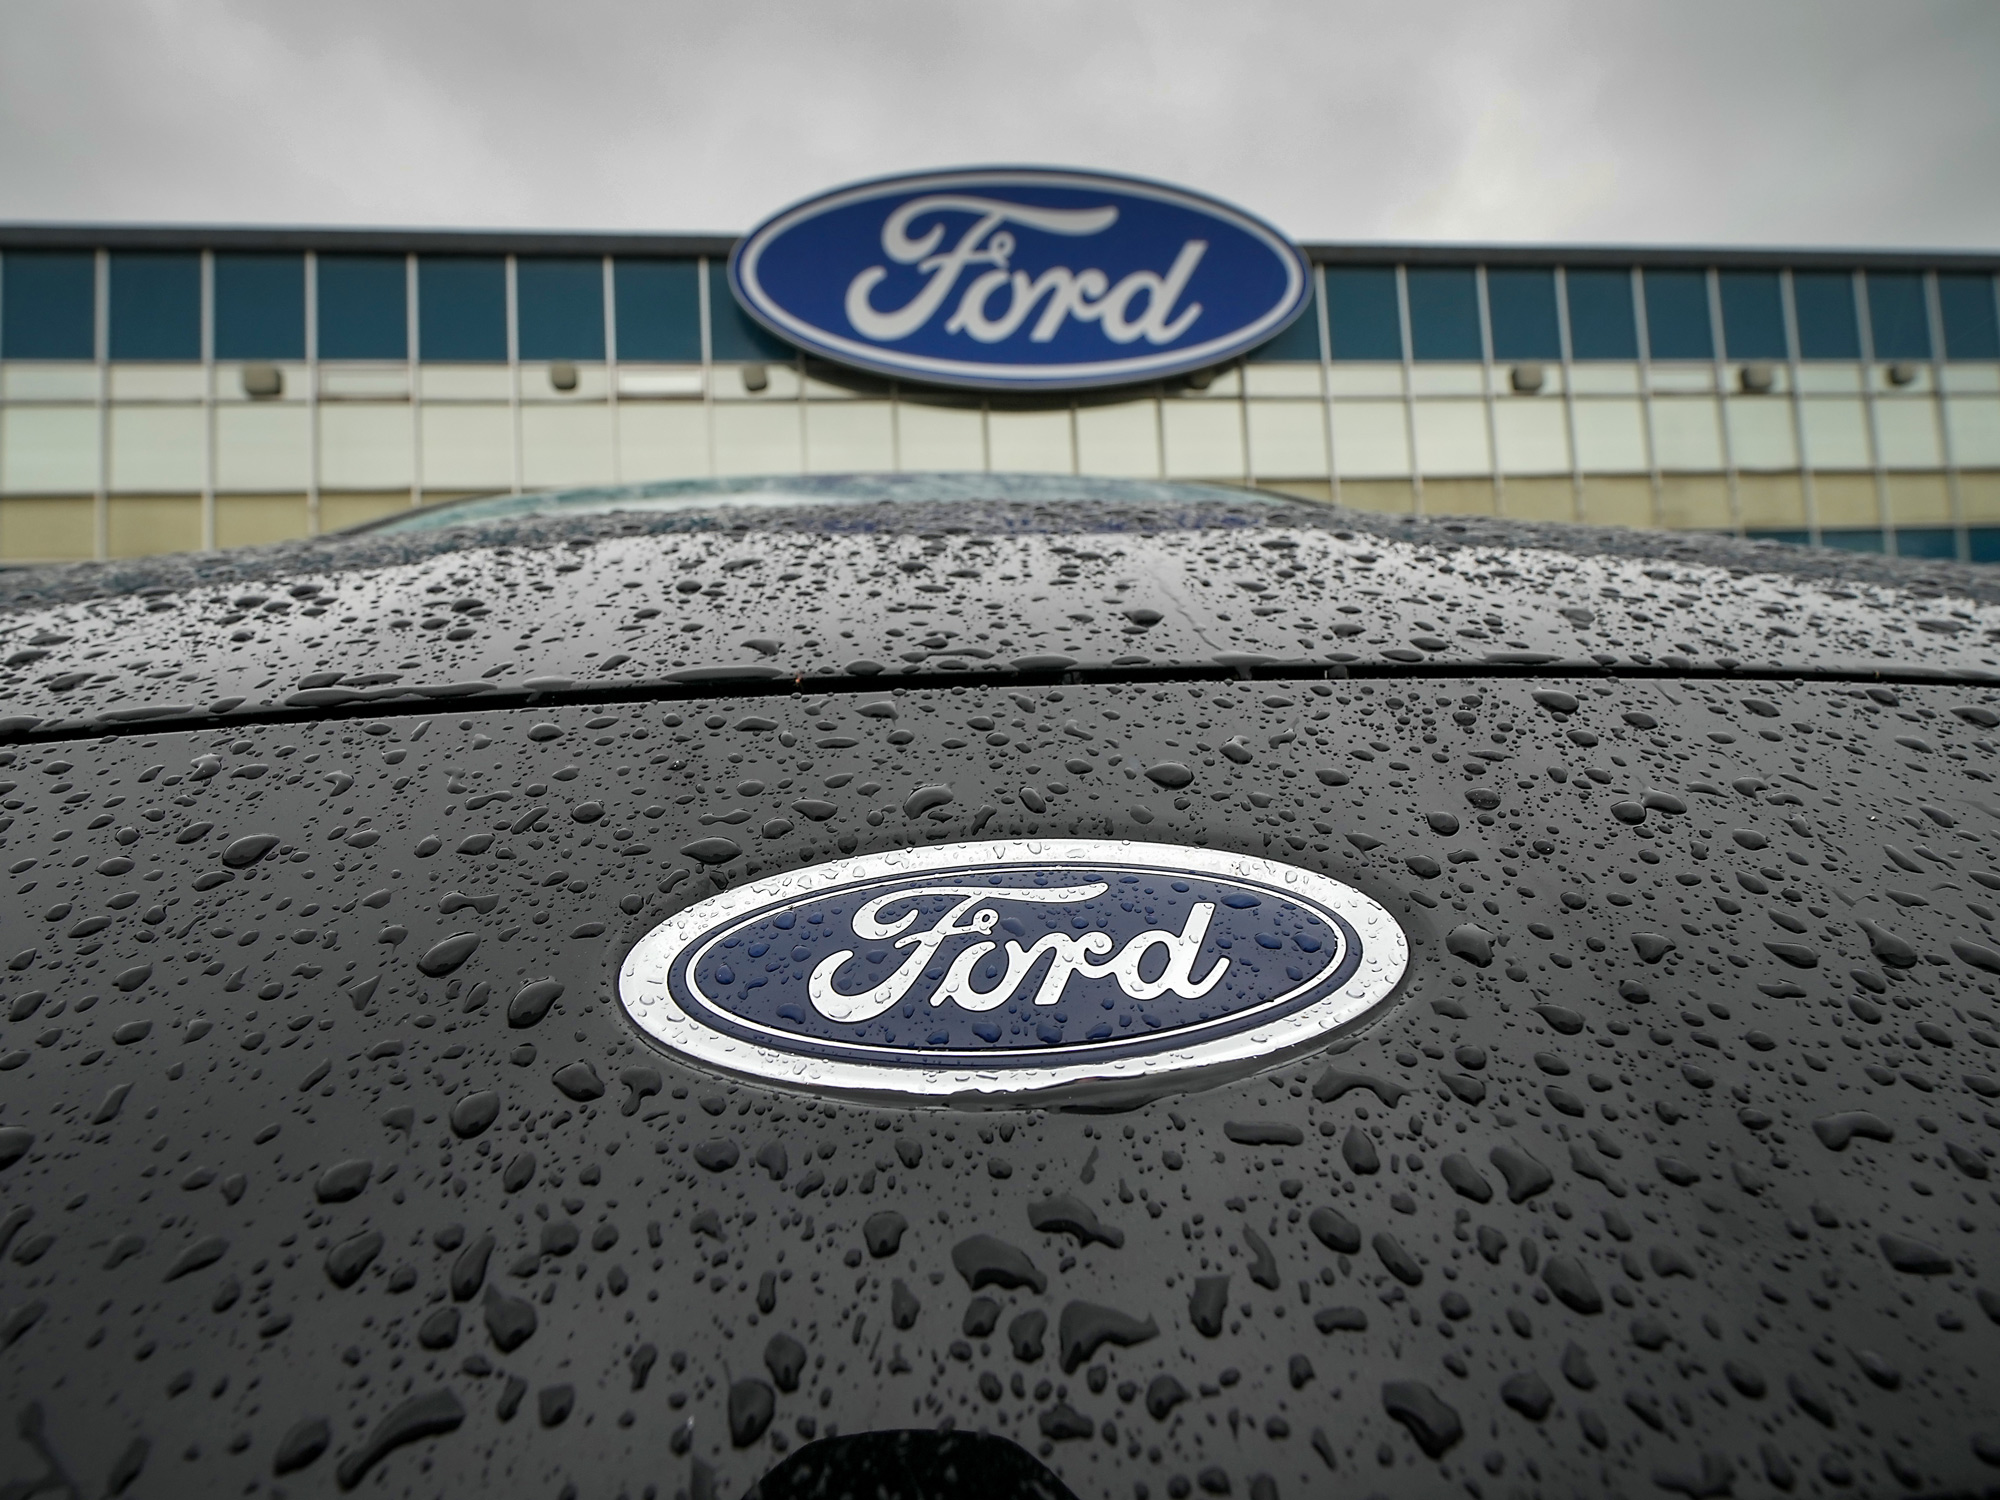 Ford last year announced plans to&nbsp;invest&nbsp;as much as £230 million&nbsp;in retooling a transmission plant in Halewood near Liverpool.